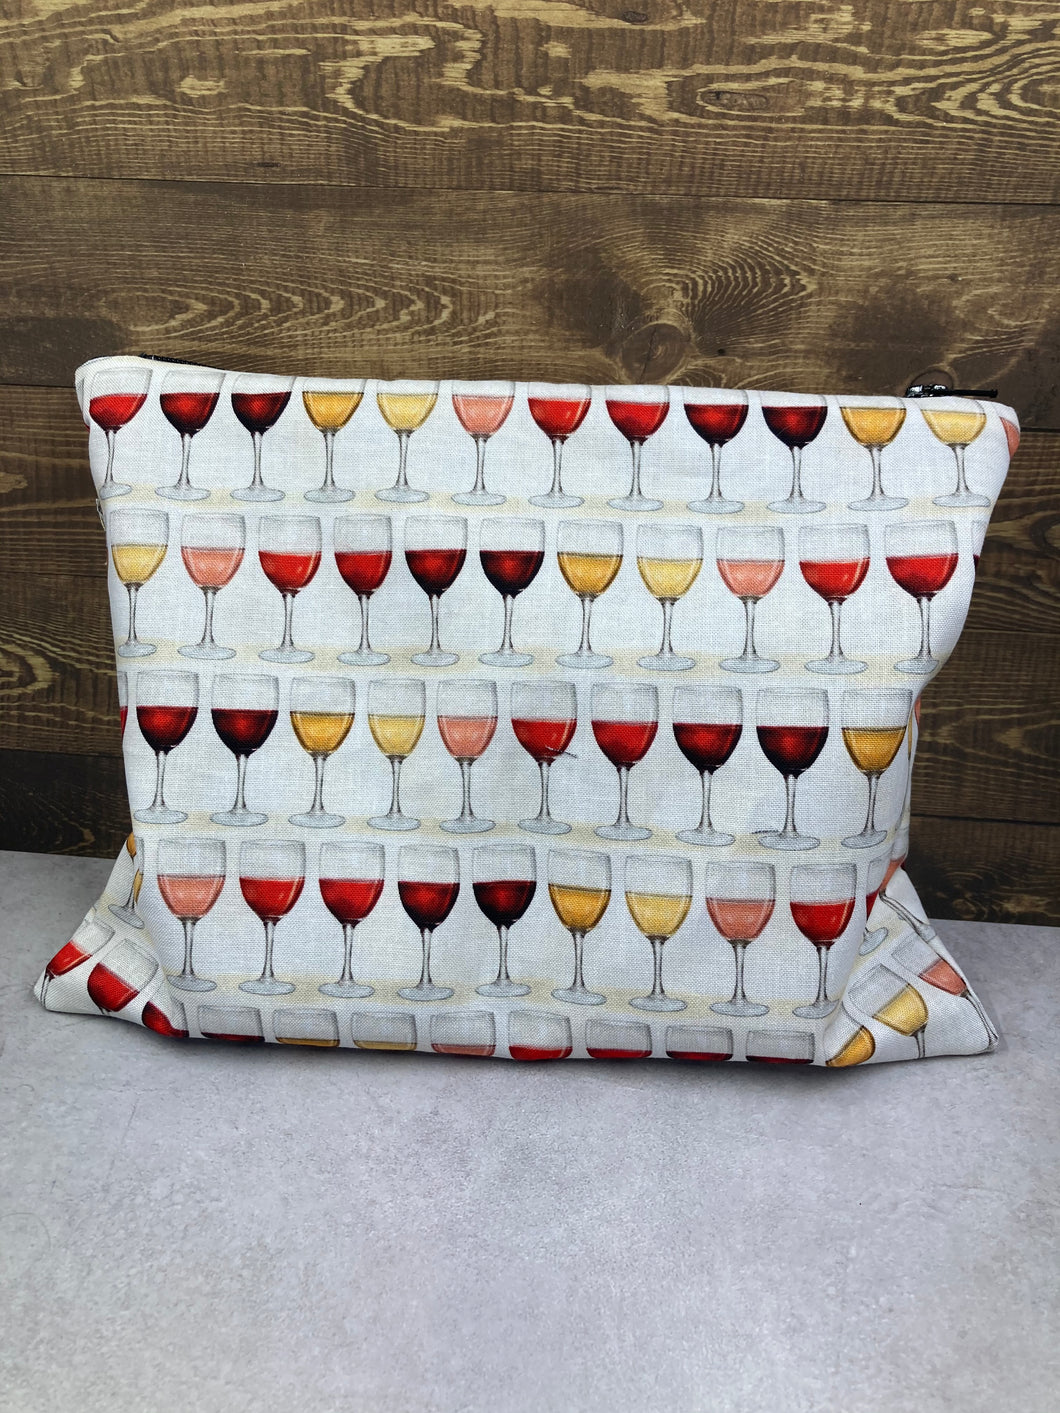 I can Make Wine Disappear! What's your Super Power? ~ Female Surprise Bag